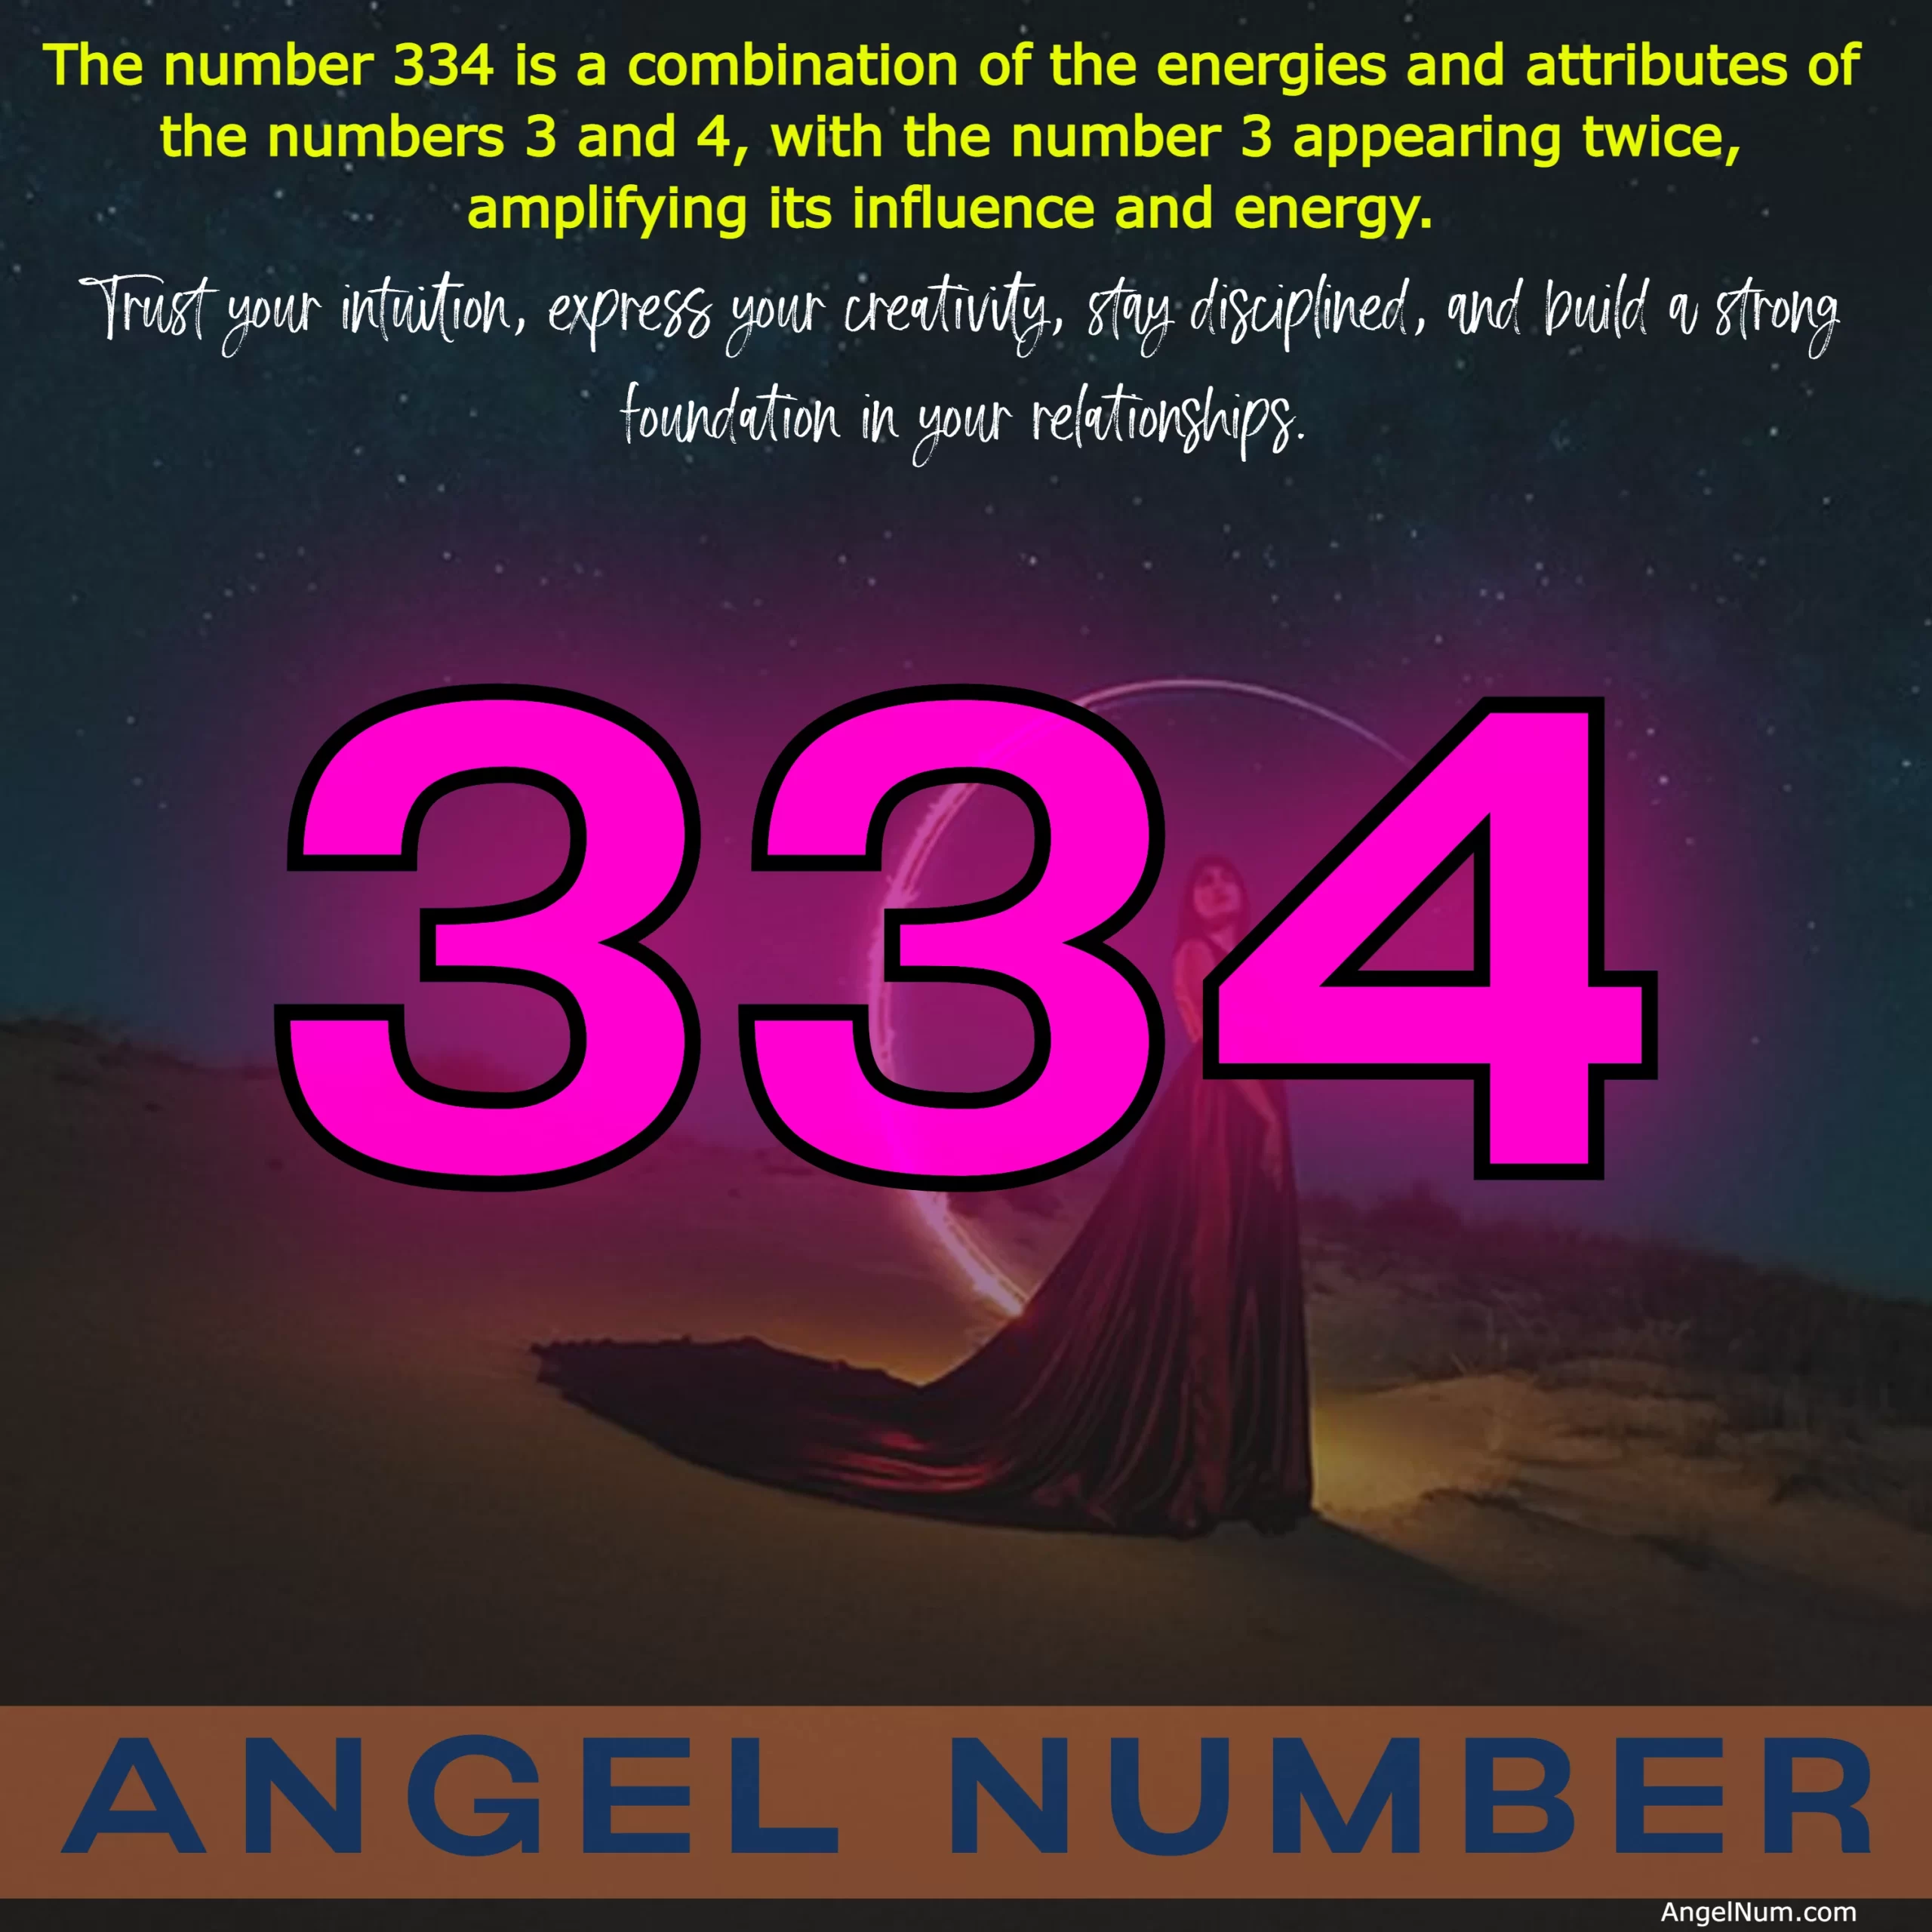 Angel Number 334: The Spiritual Significance and Meaning